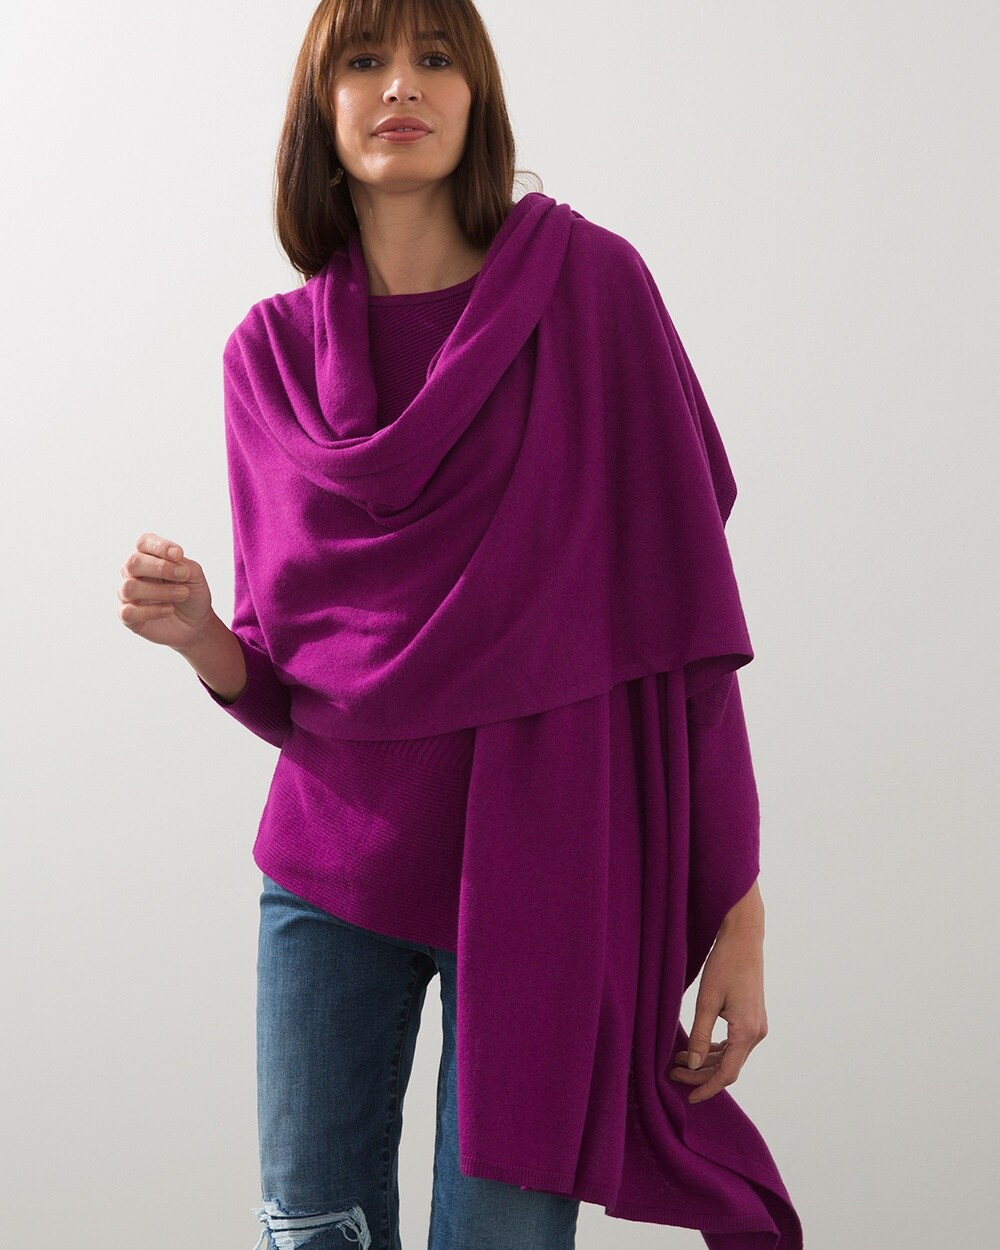 Cashmere-Wool Blend Travel Wrap video preview image, click to start video